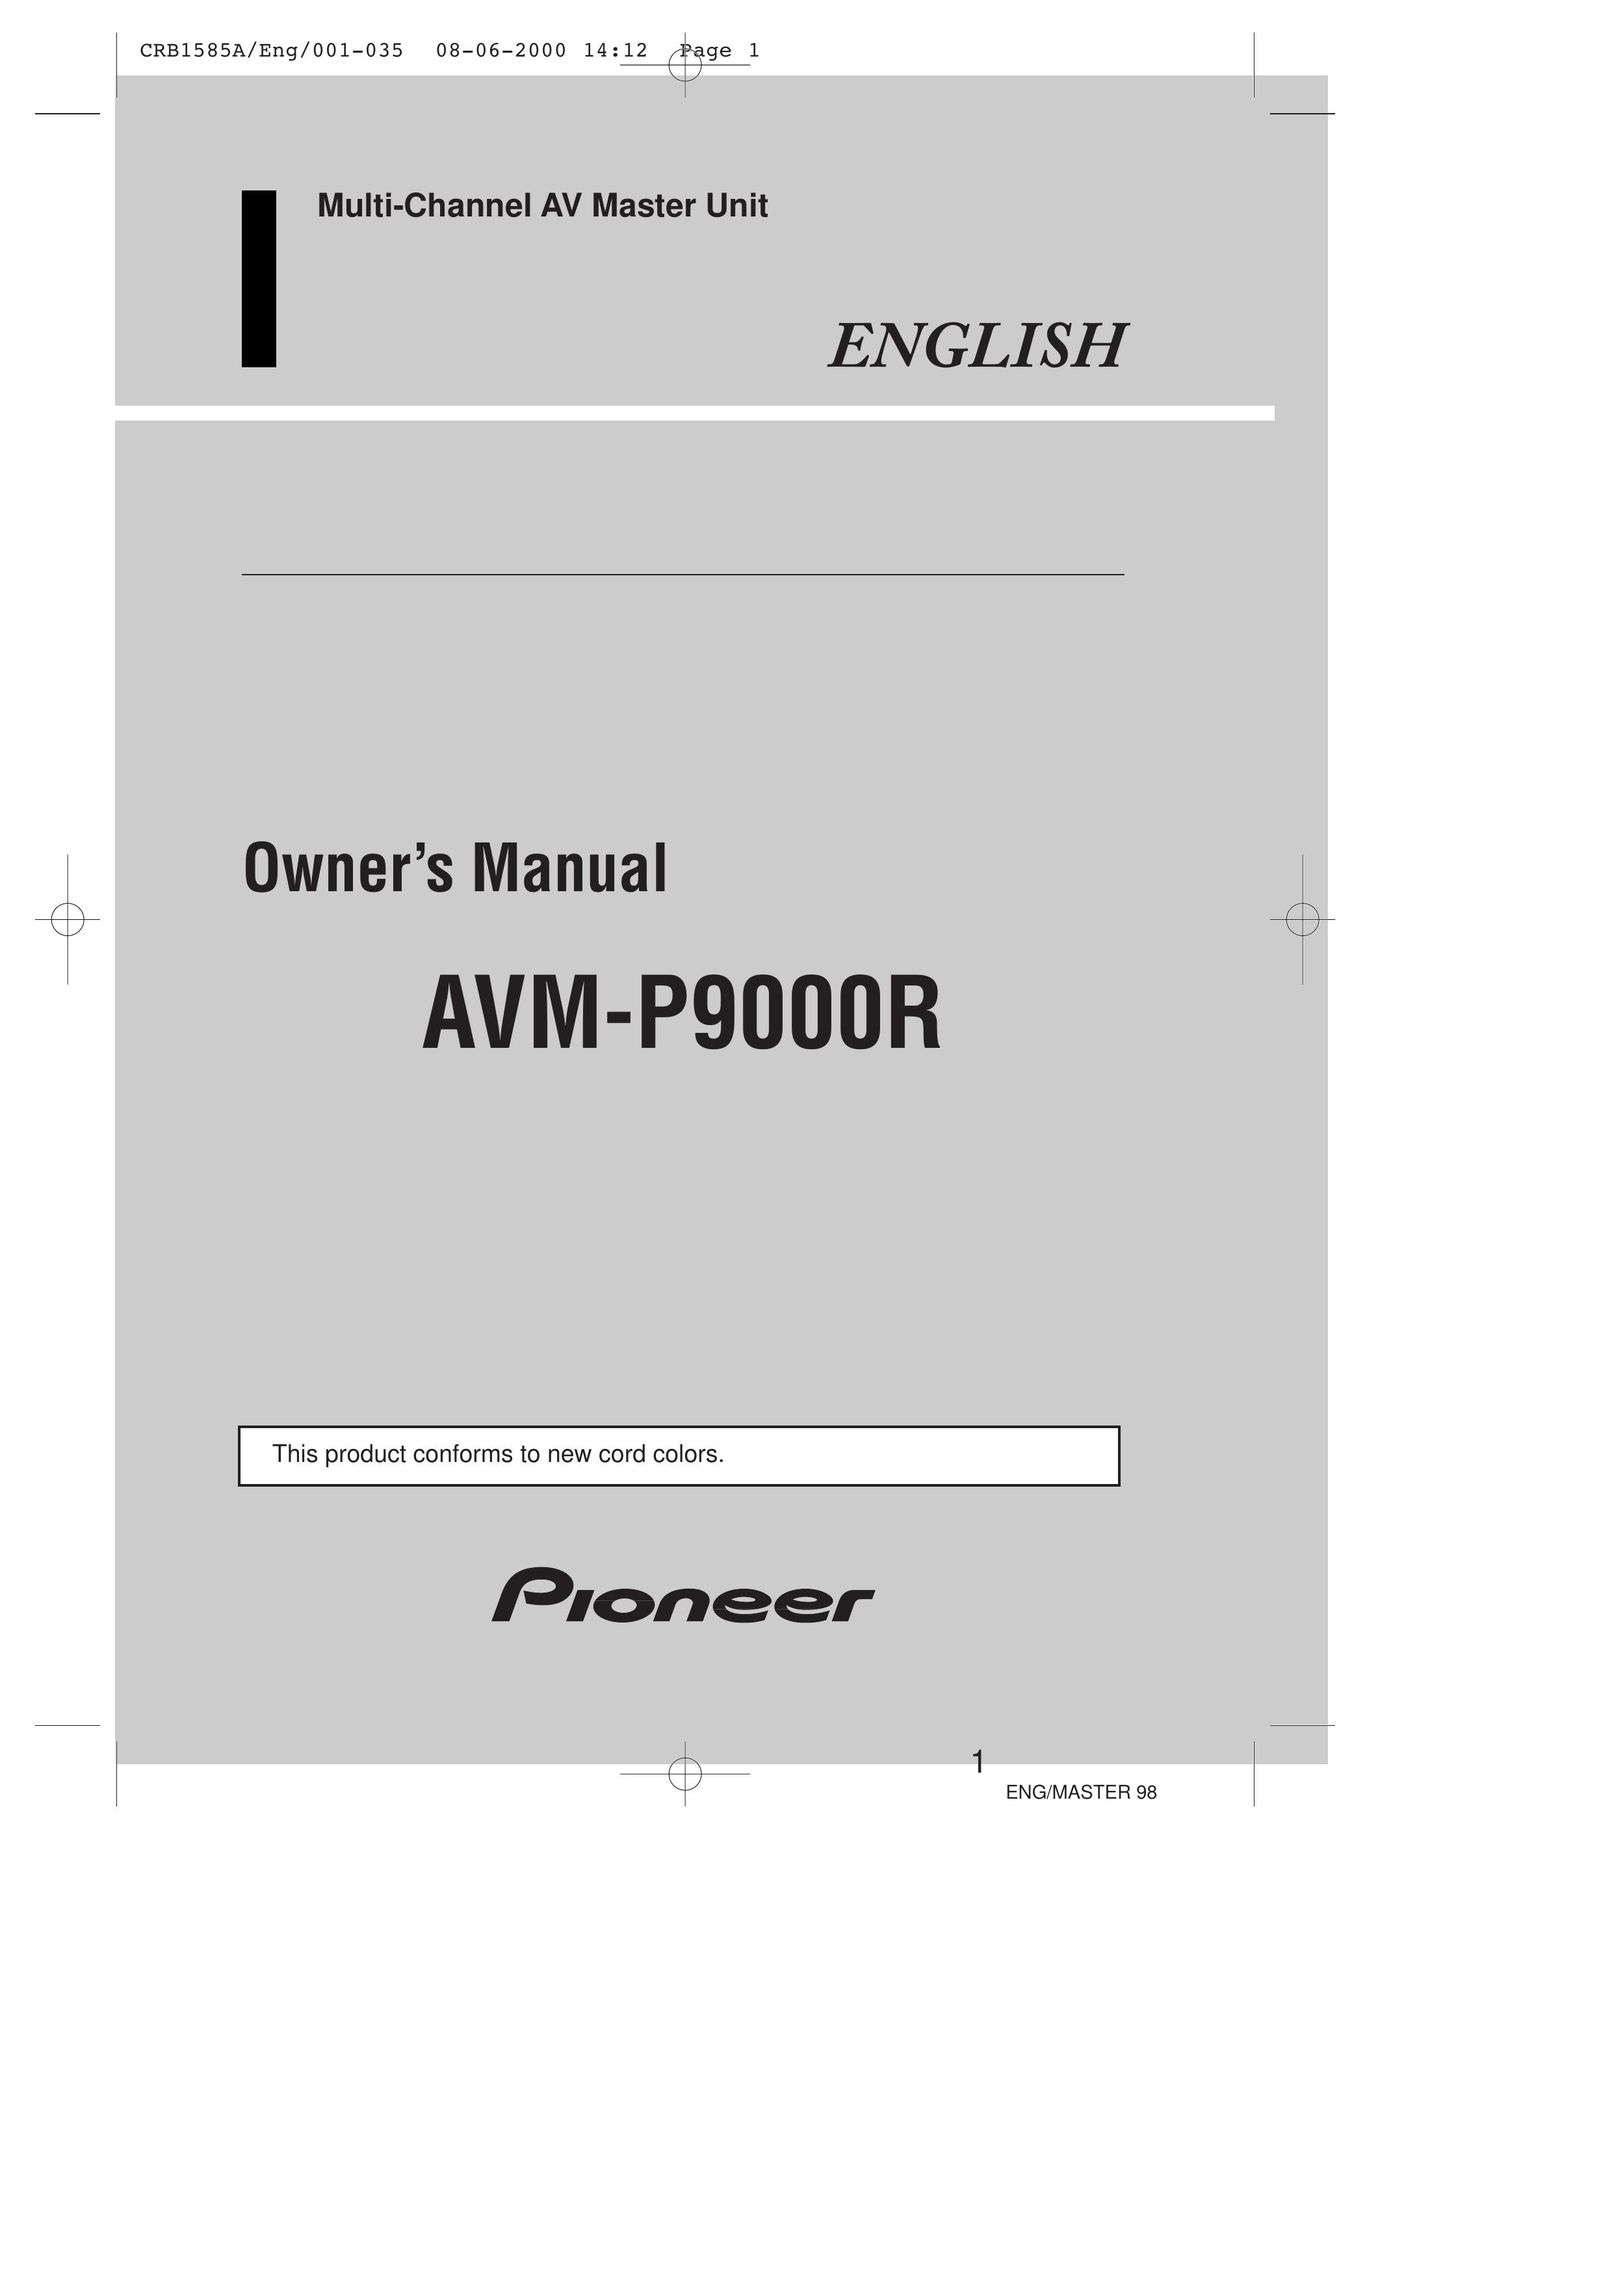 Pioneer AVM-P9000R Stereo Receiver User Manual